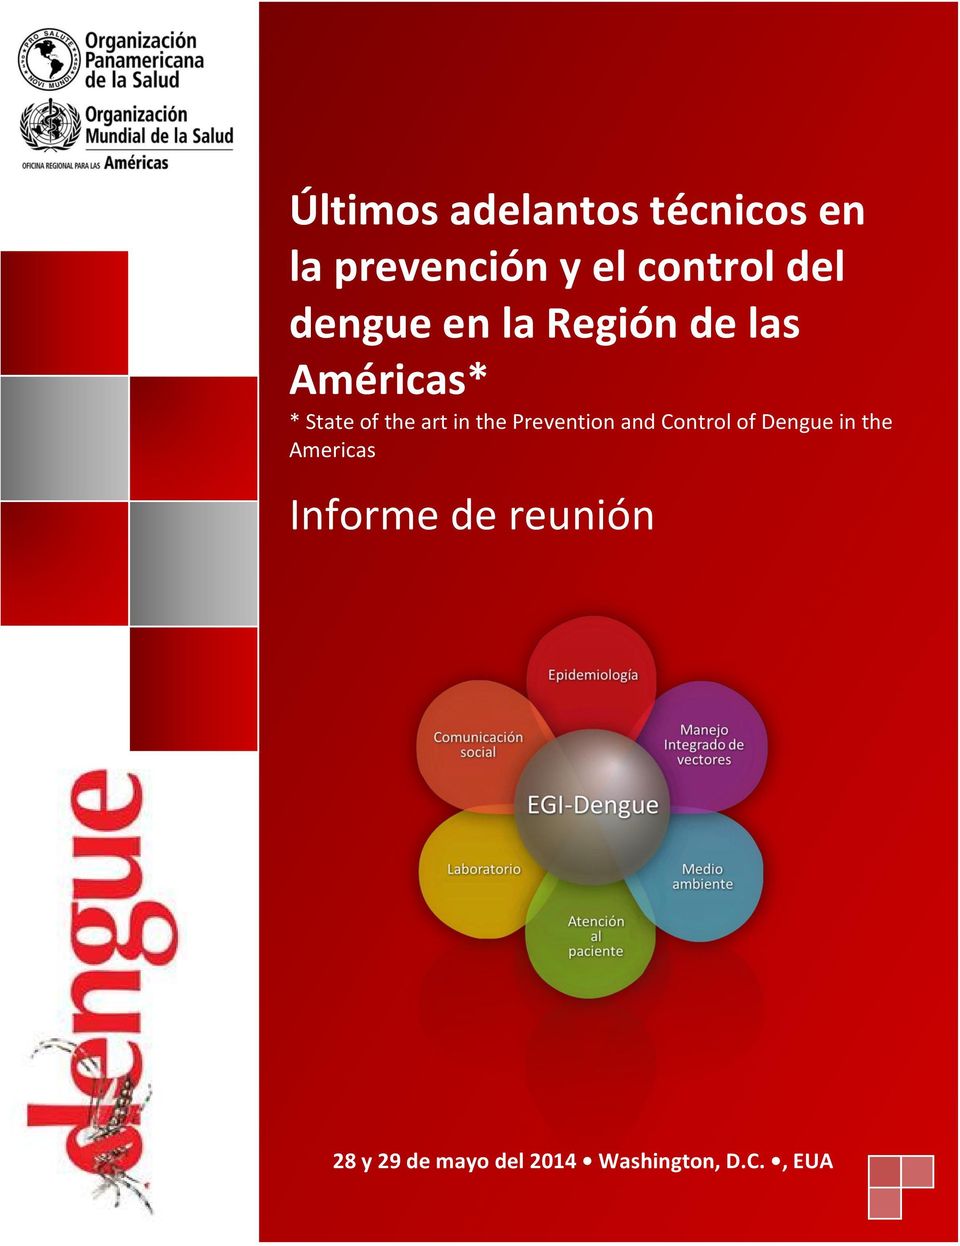 in the Prevention and Control of Dengue in the Americas